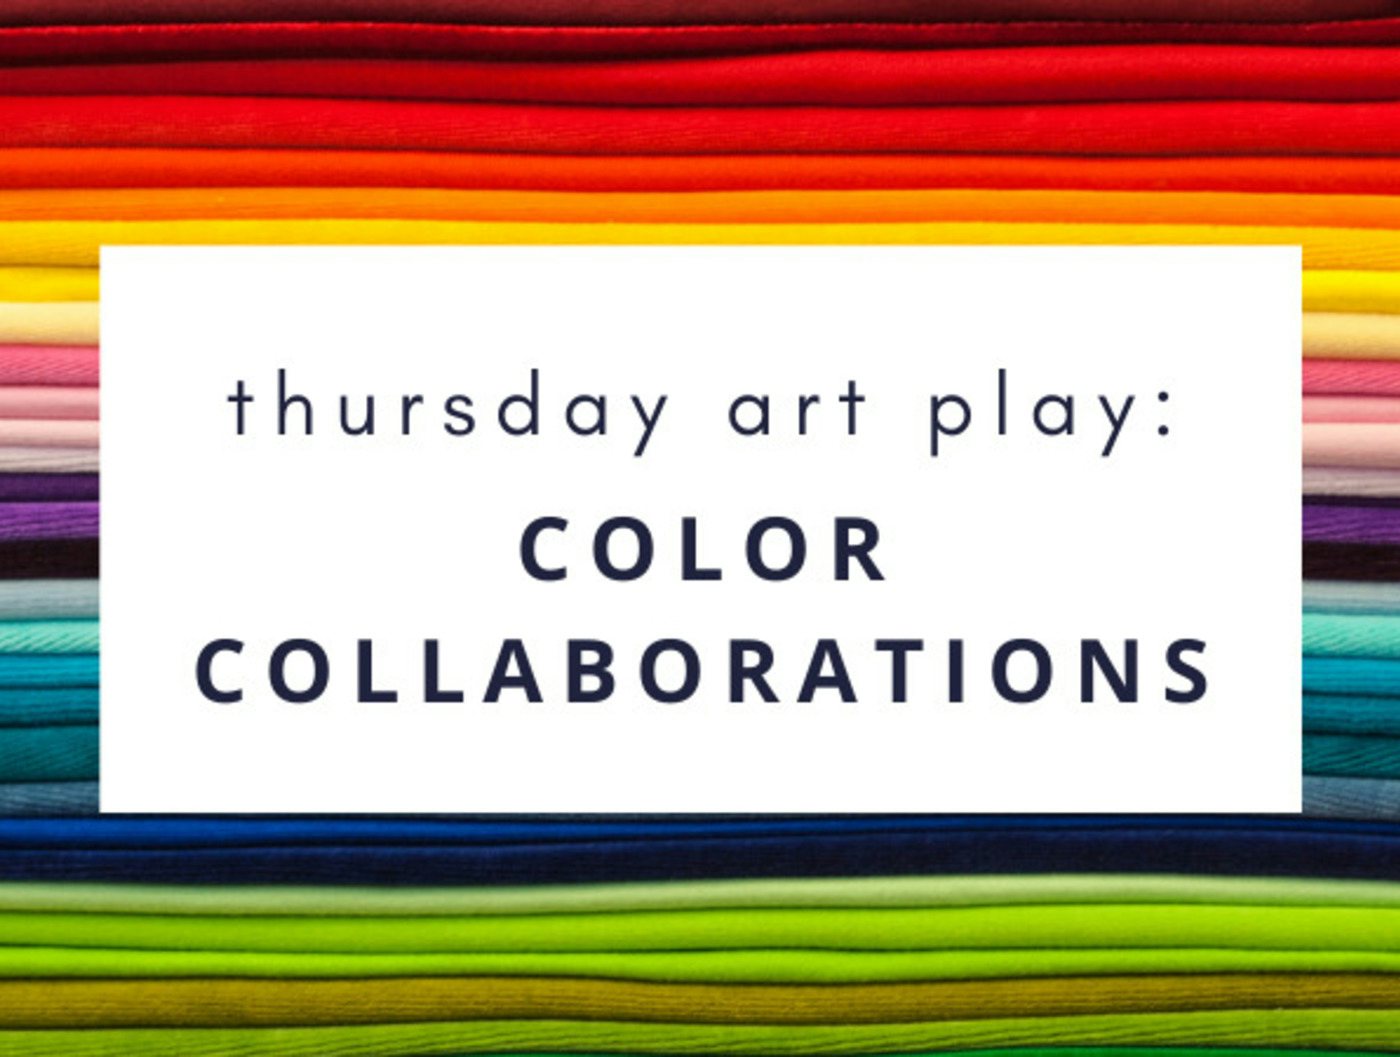 Thursday Art Play: Color Collaborations